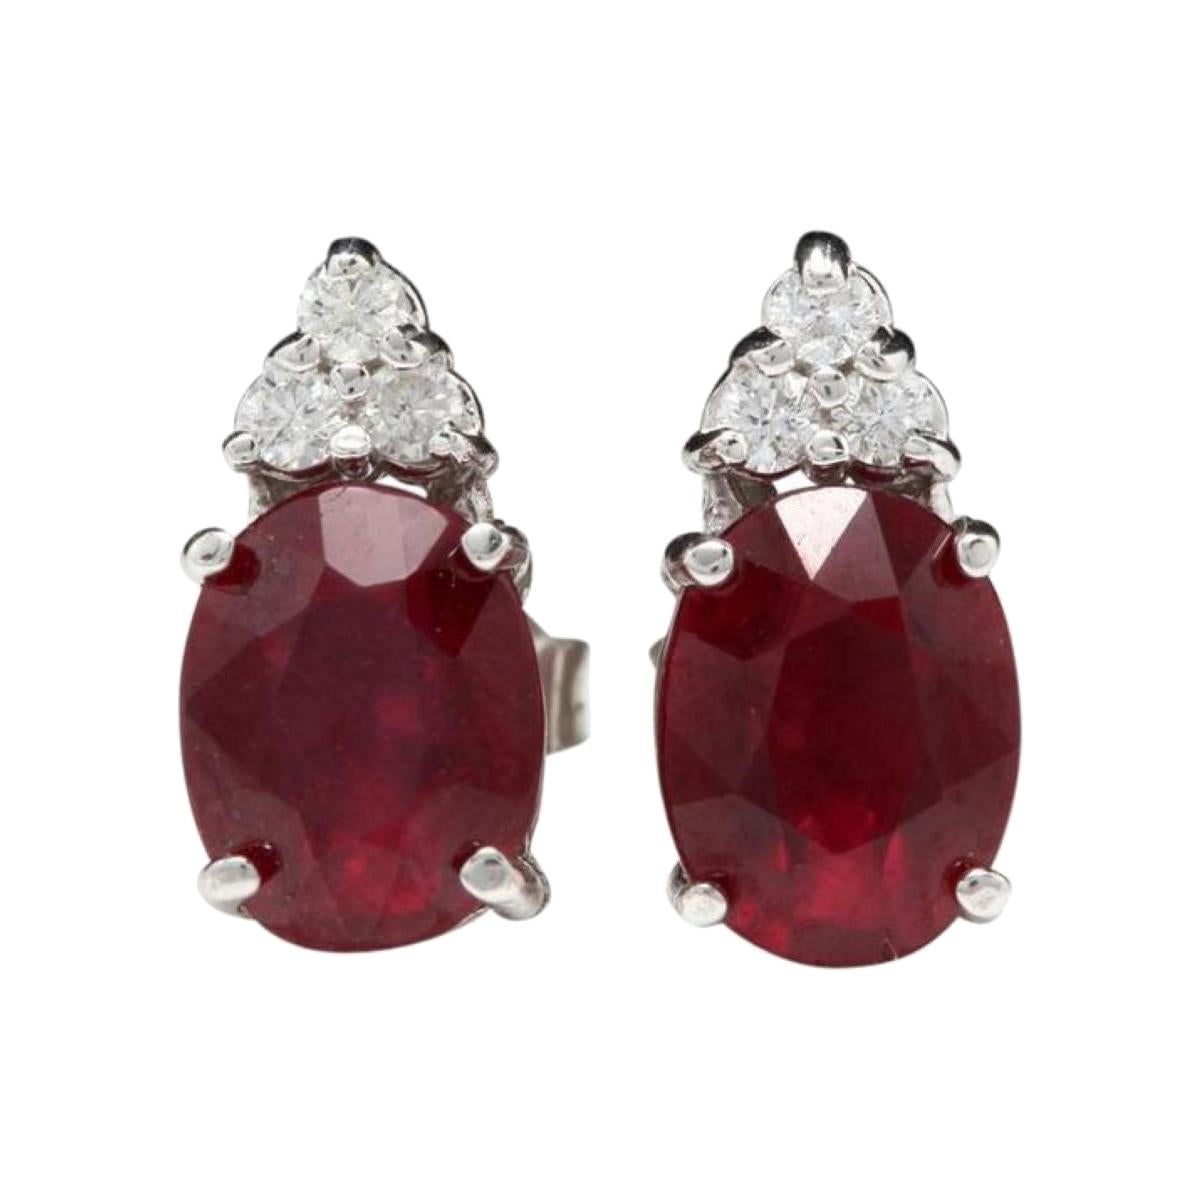 Exquisite 4.20 Carat Red Ruby and Natural Diamond 14 Karat Solid White Gold Stud